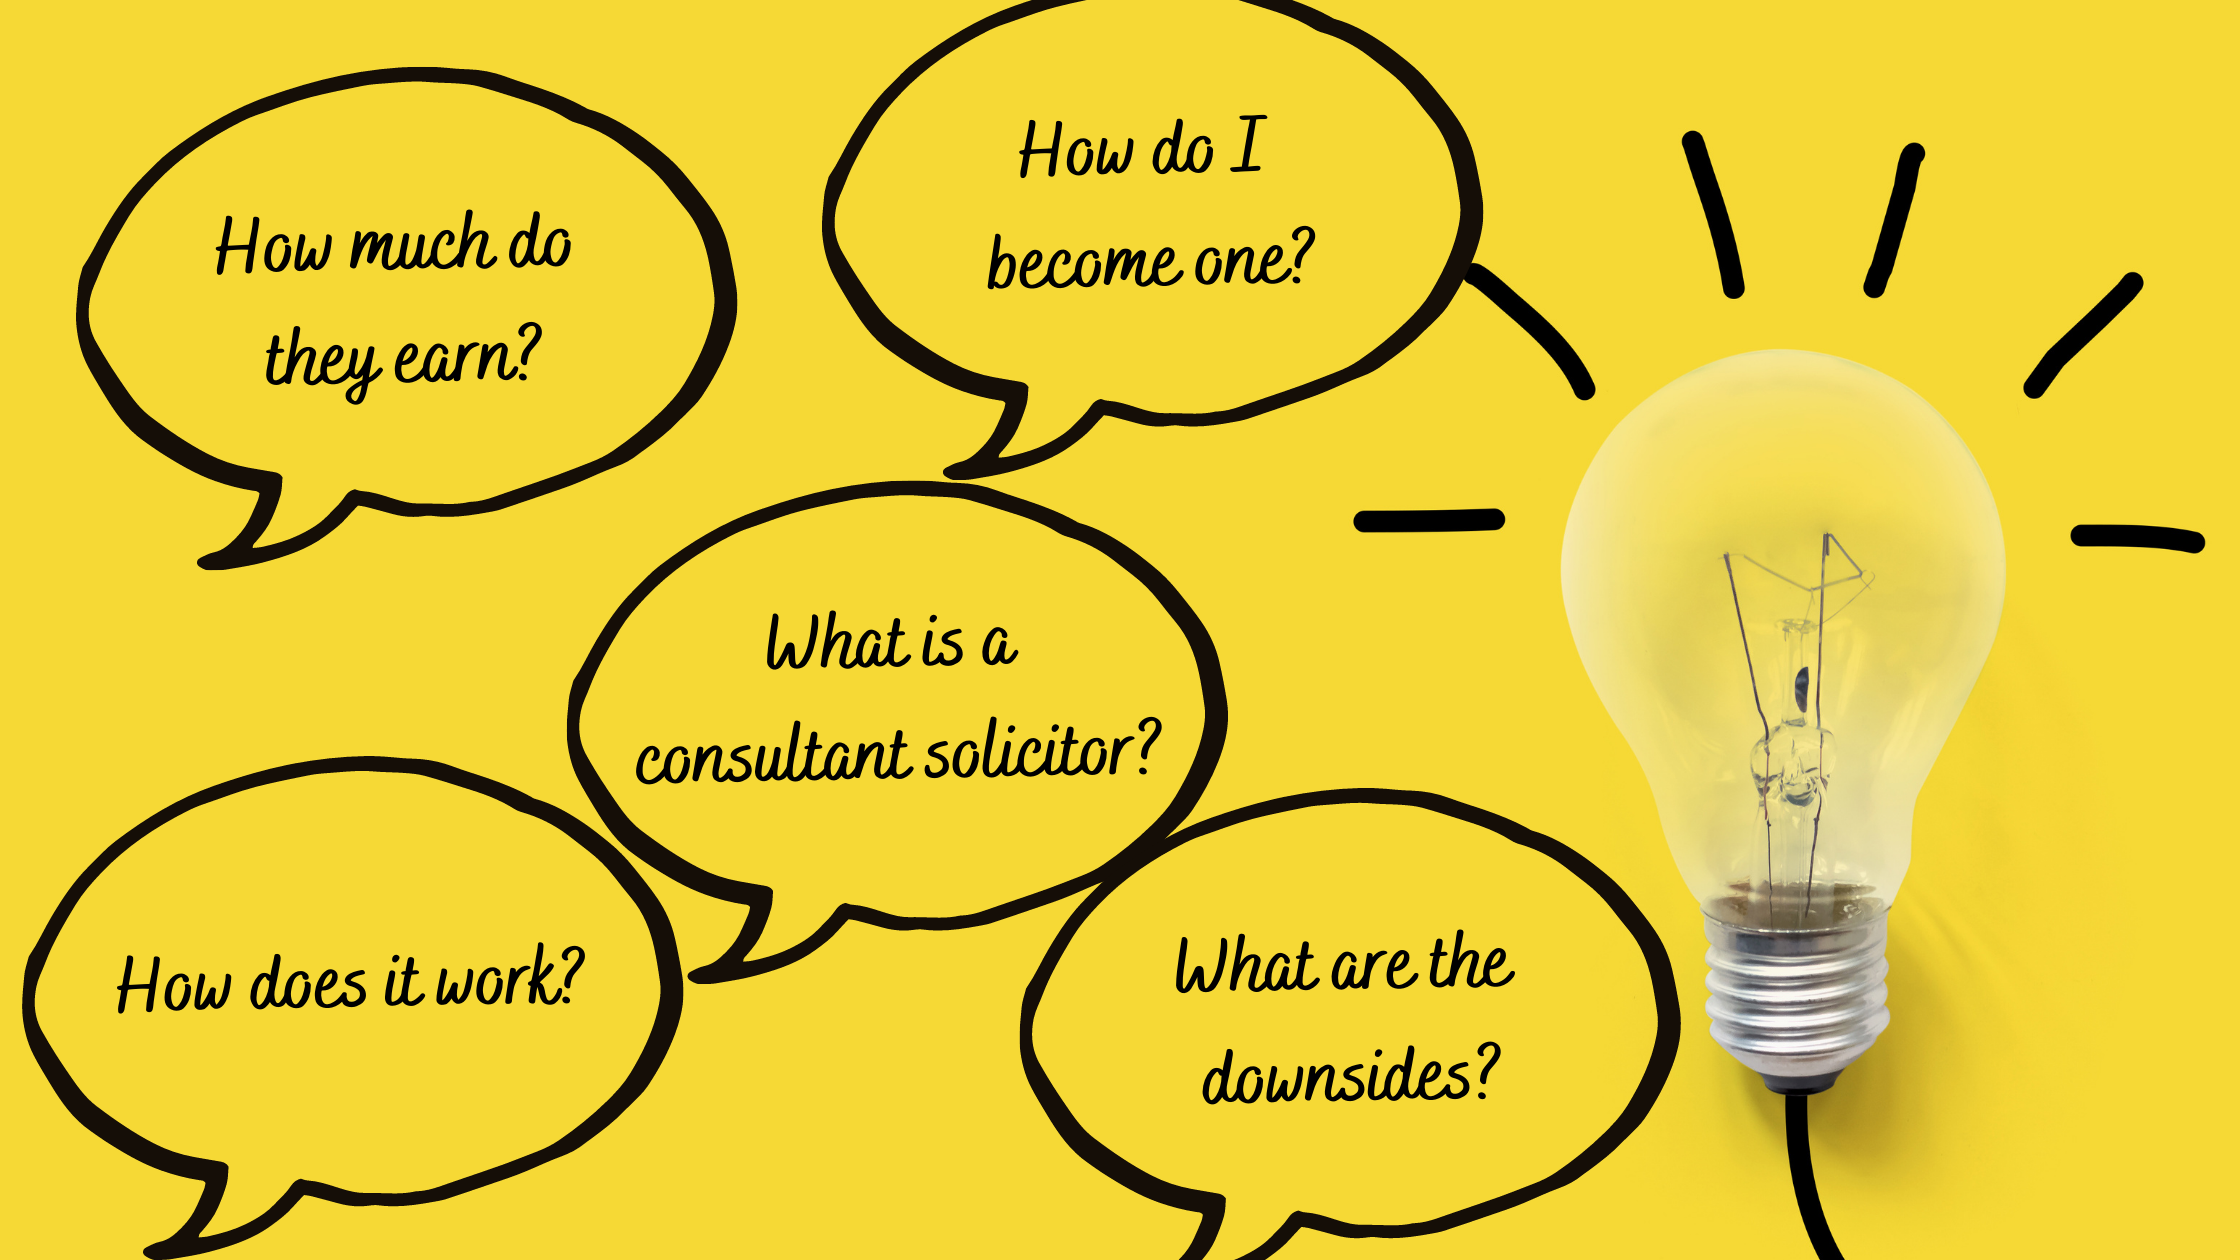 Consultant solicitors - frequently asked questions